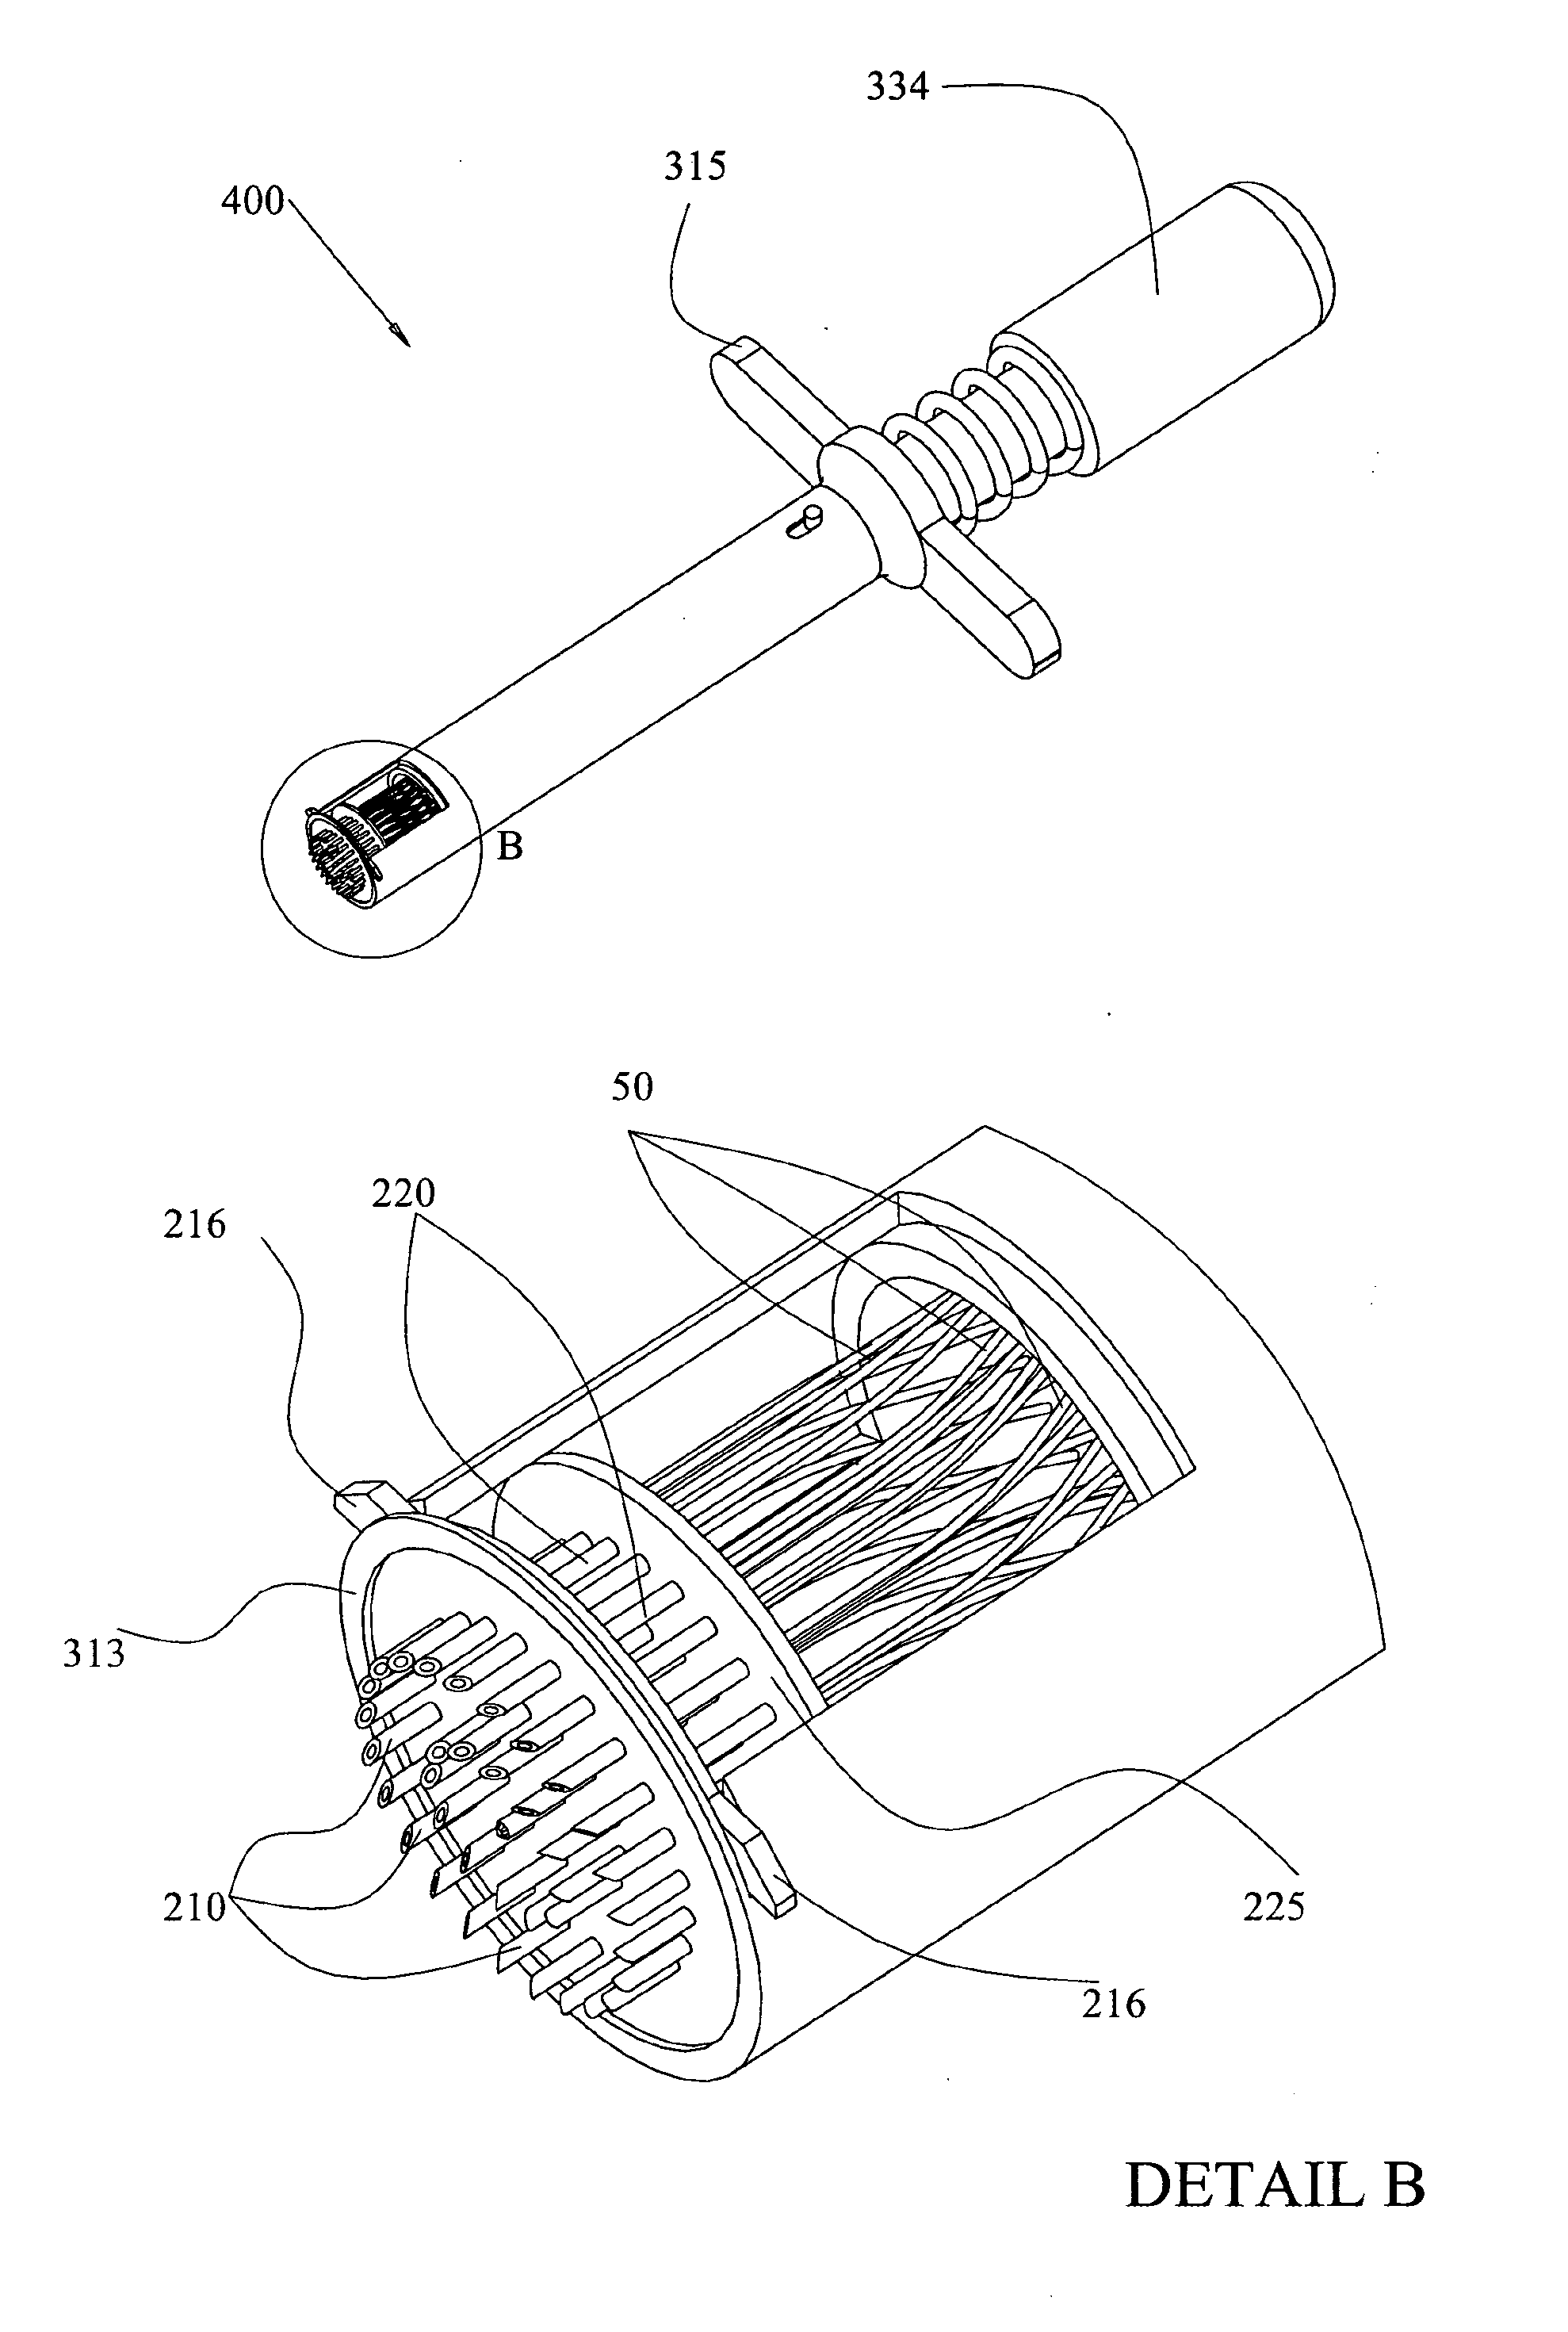 Hair implant anchors and systems and methods for use thereof